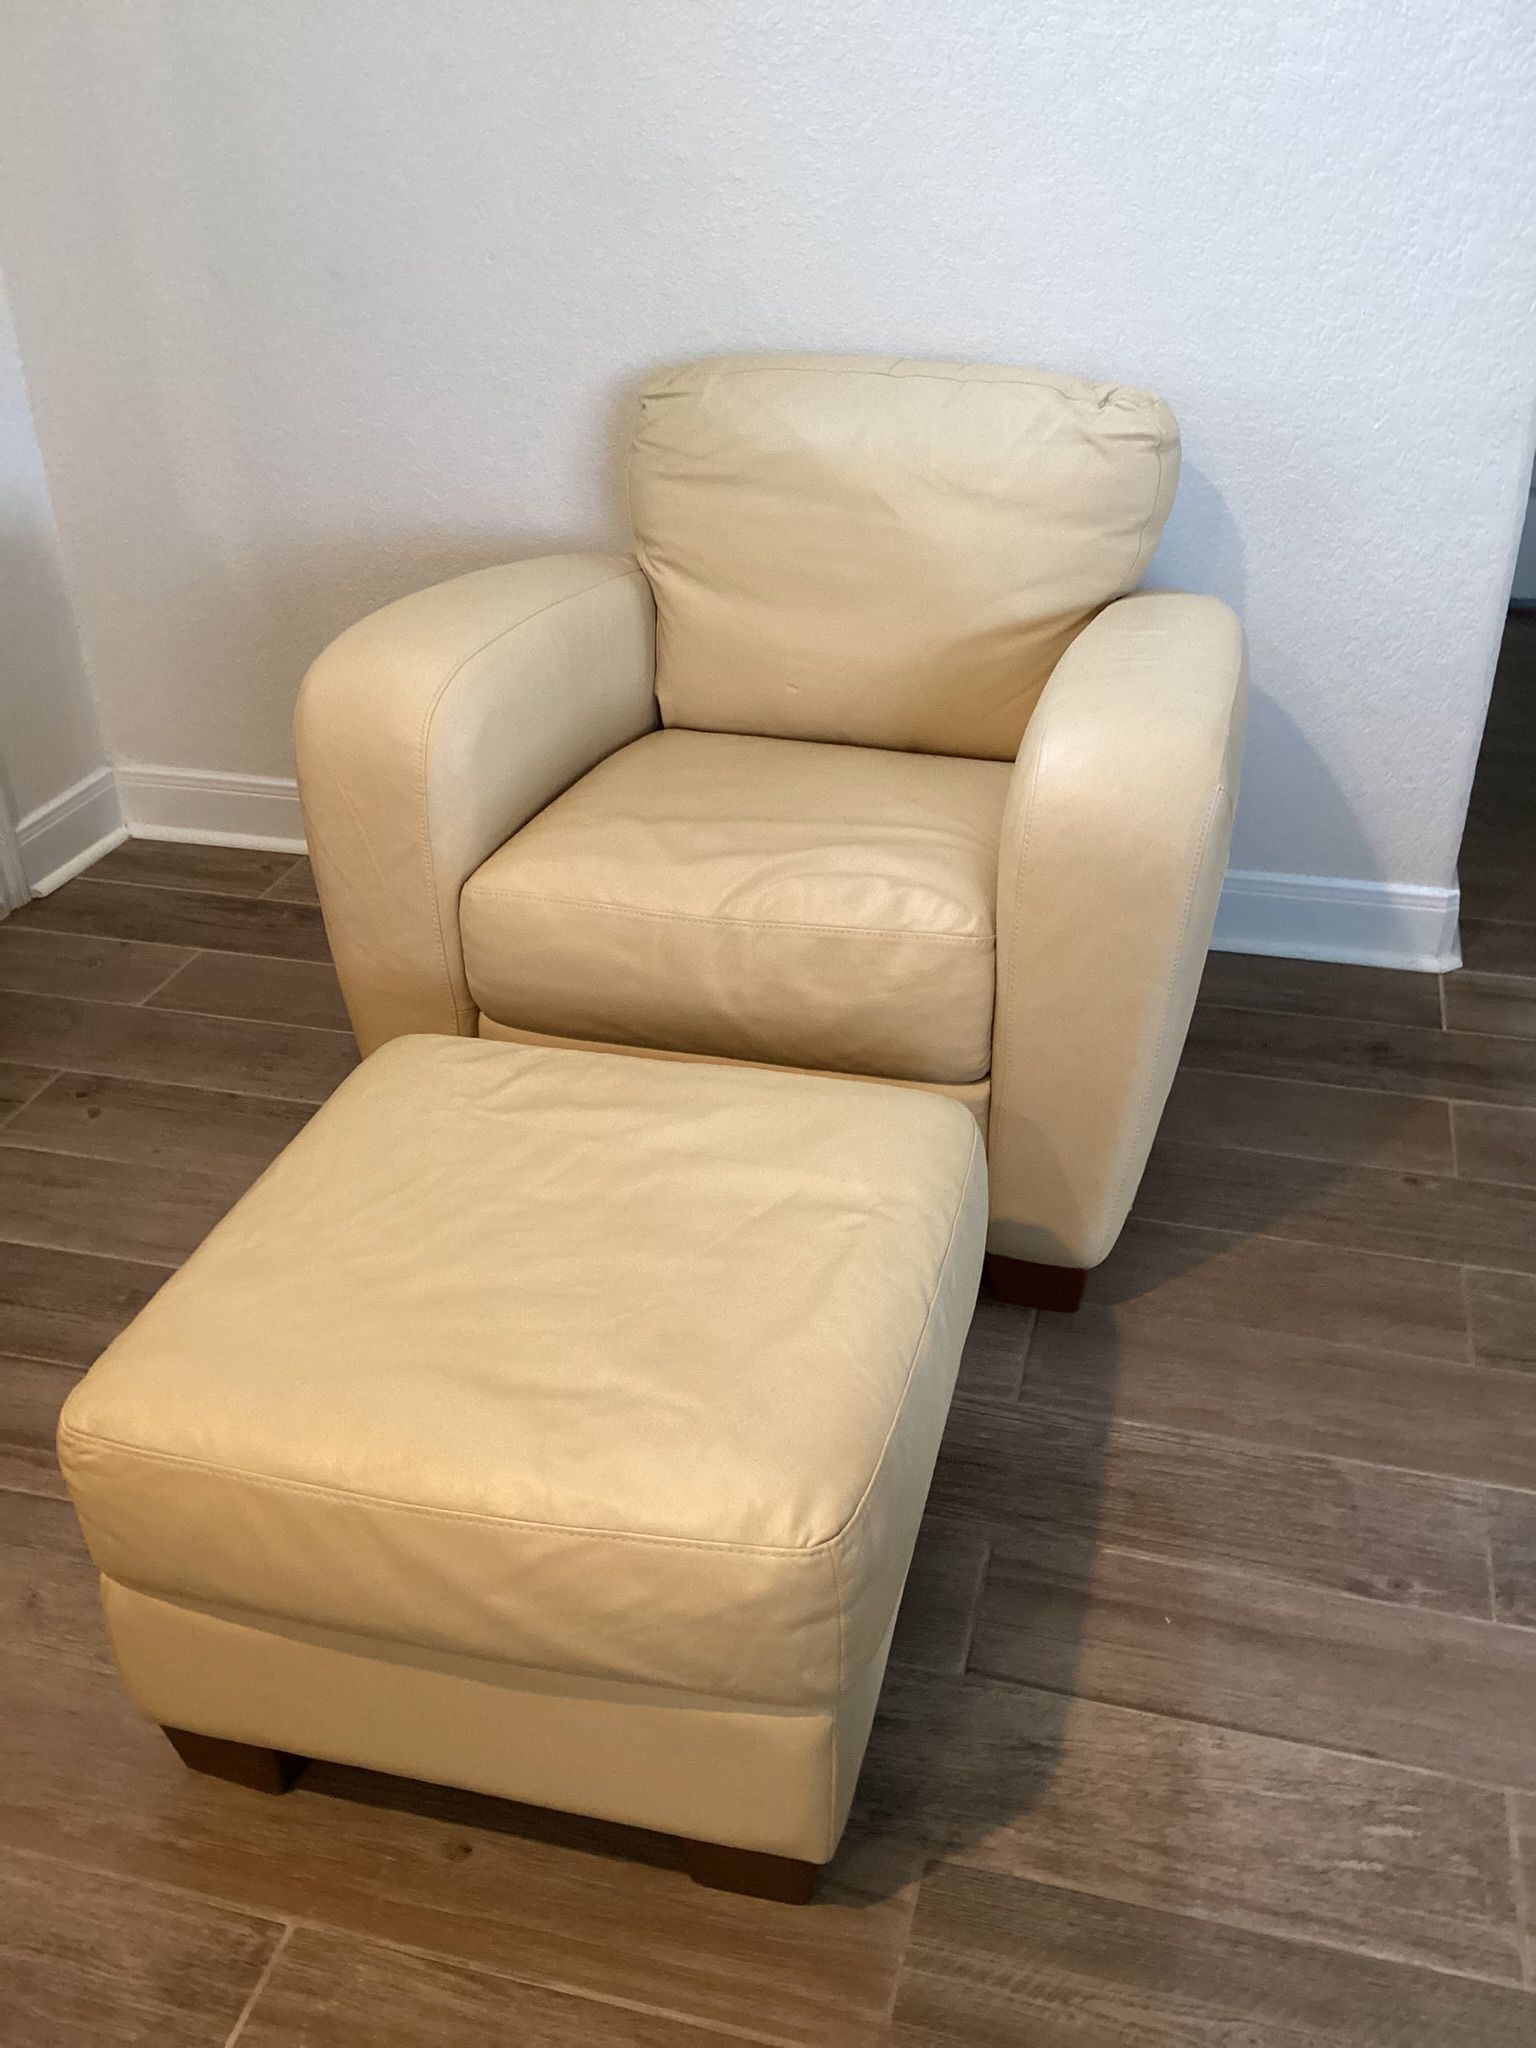 Leather Club Chair With Ottoman